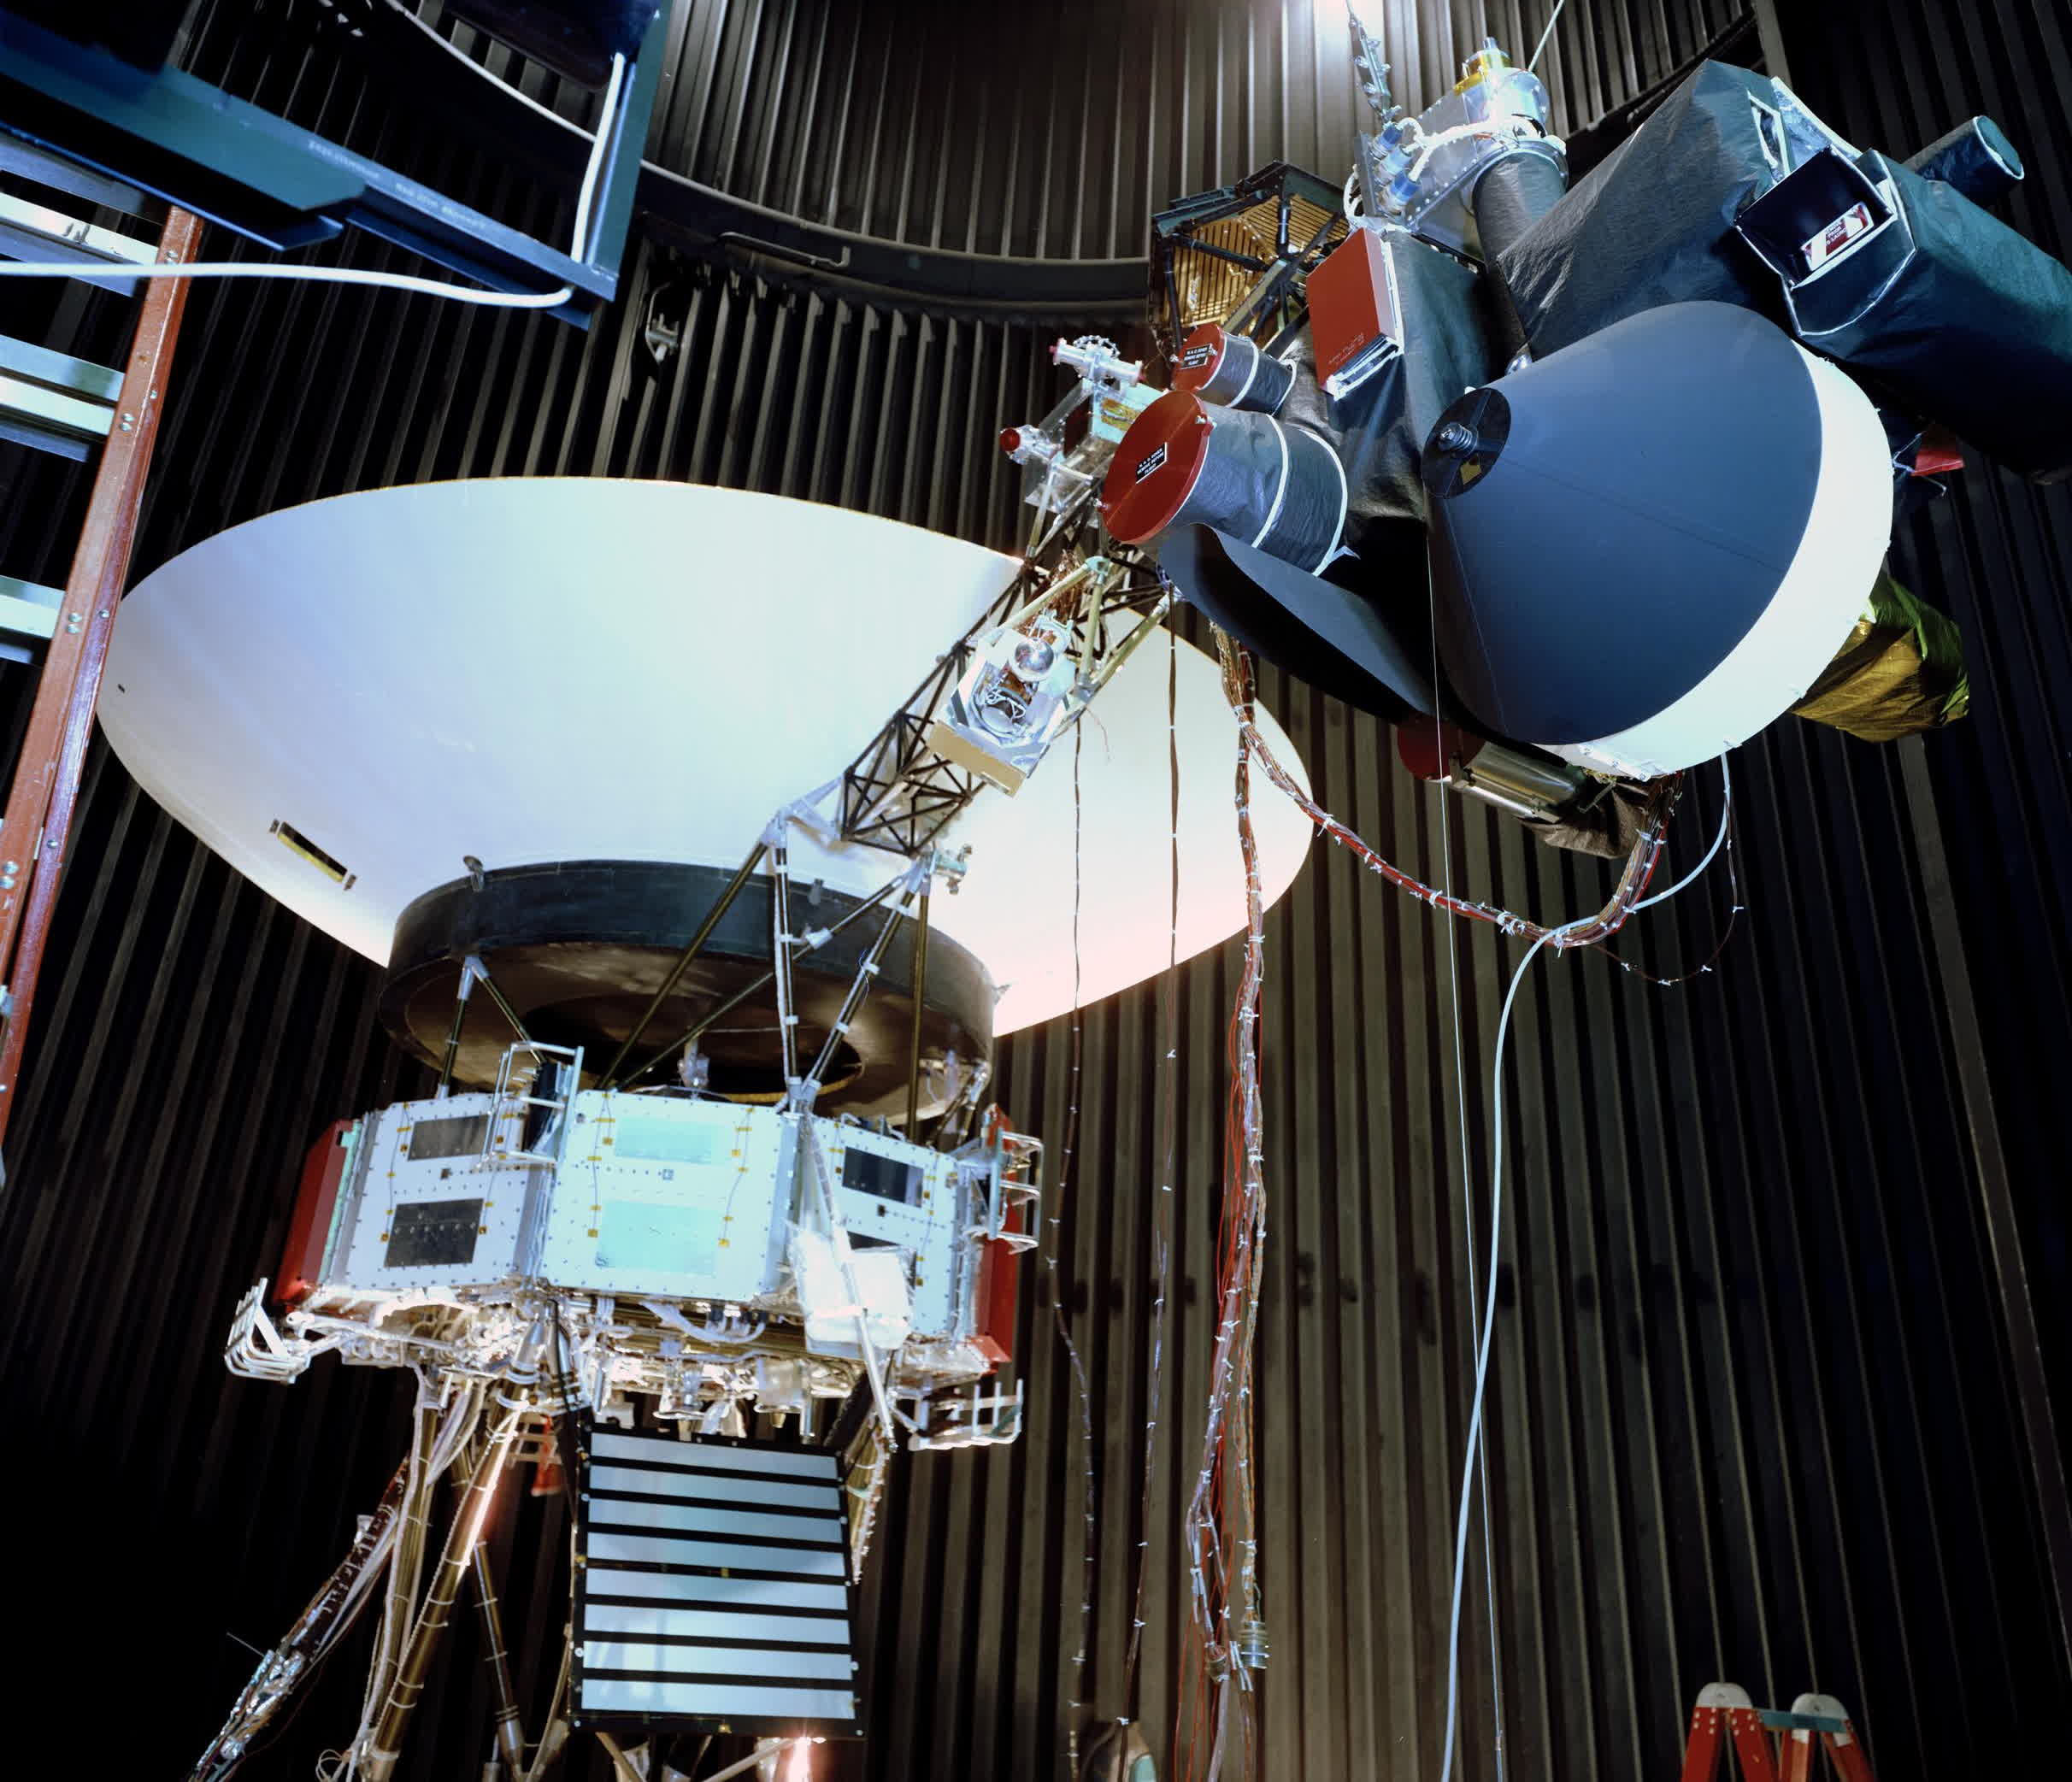 A new power strategy will keep NASA's Voyager 2 instruments working for longer in outer space